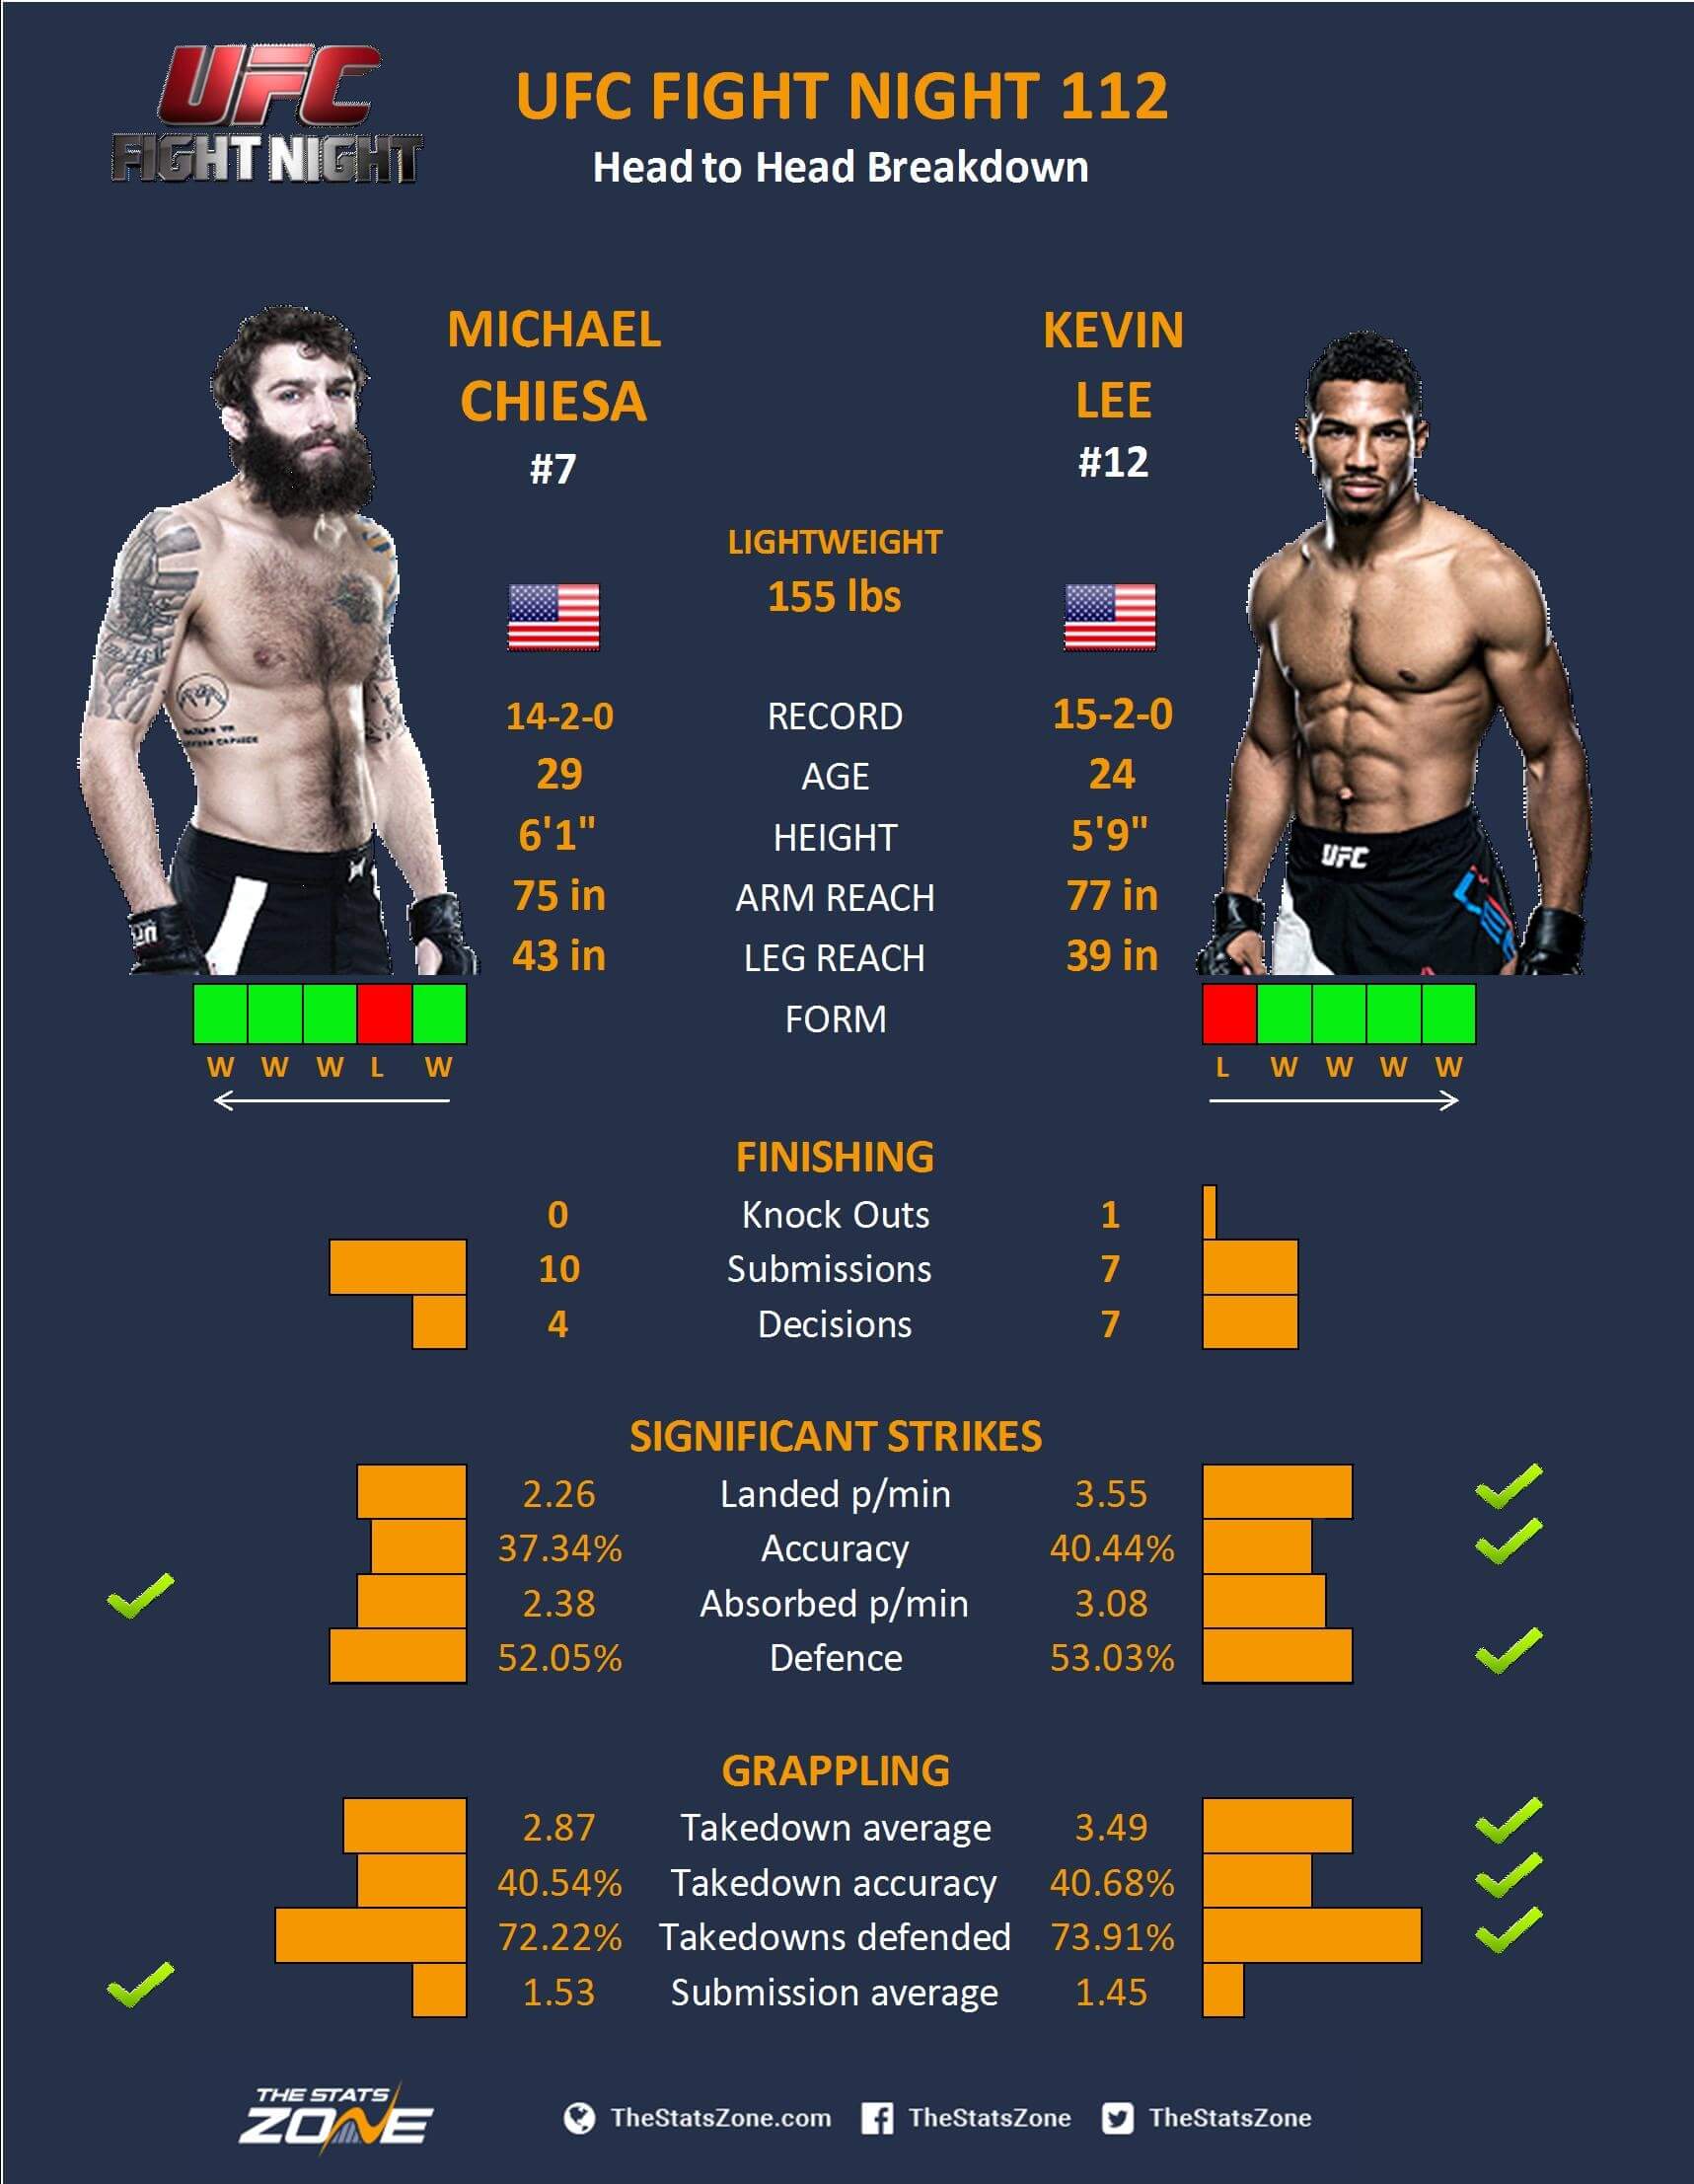 UFC Fight Night 112: Michael Chiesa vs Kevin Lee - The Stats Zone